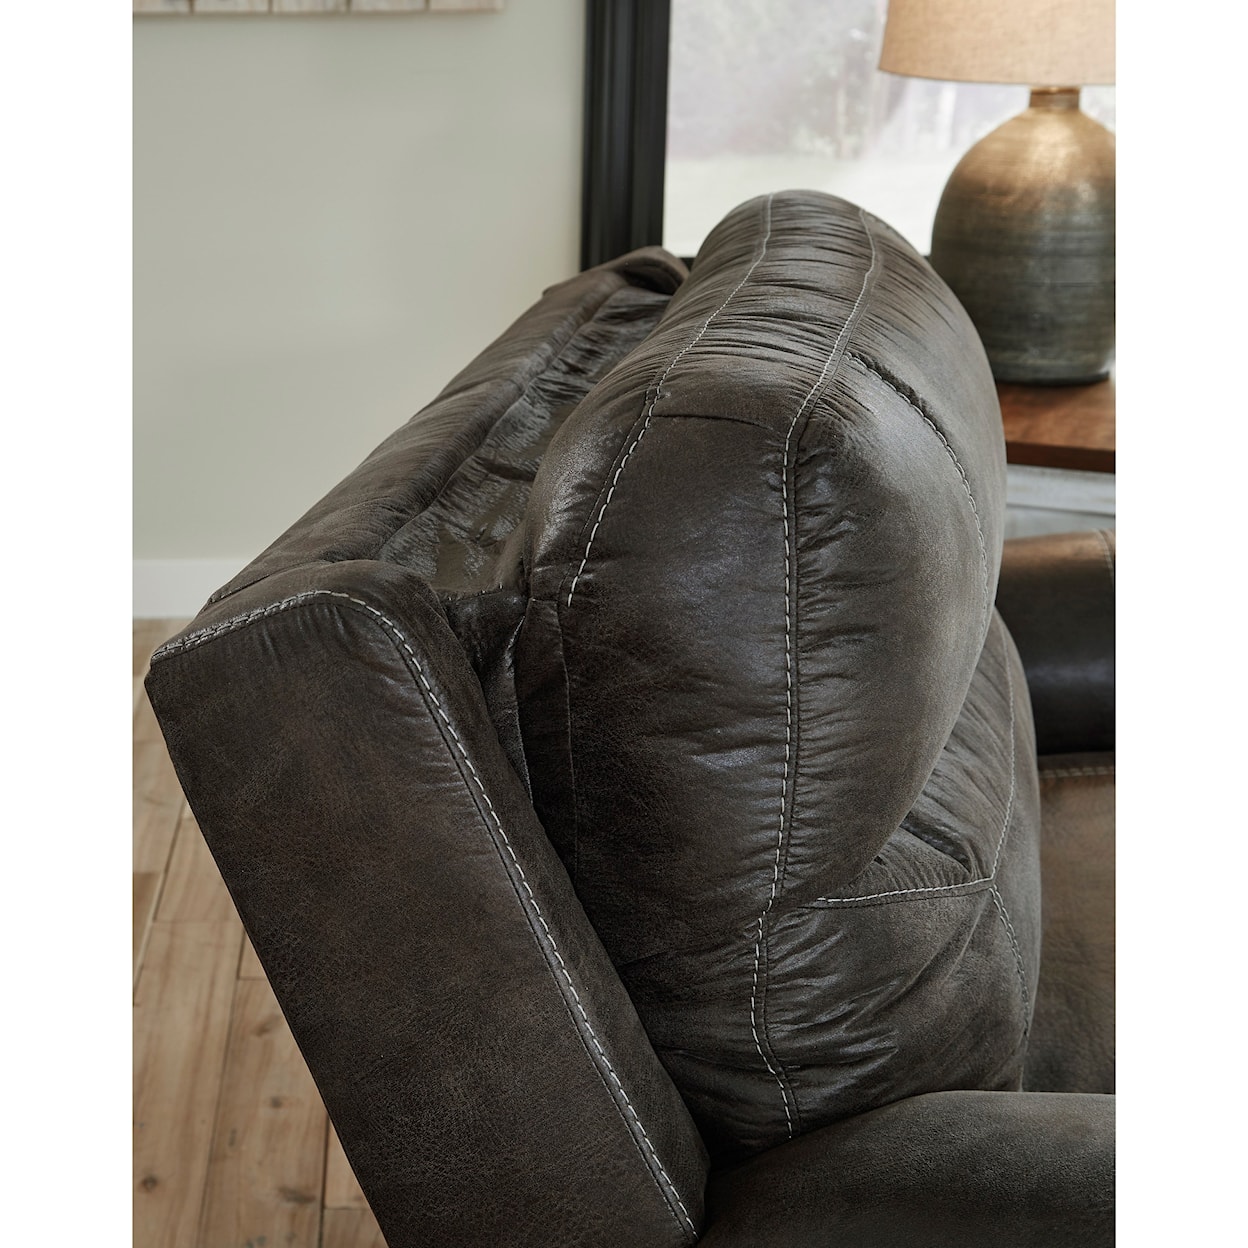 Benchcraft Grearview Power Reclining Sofa